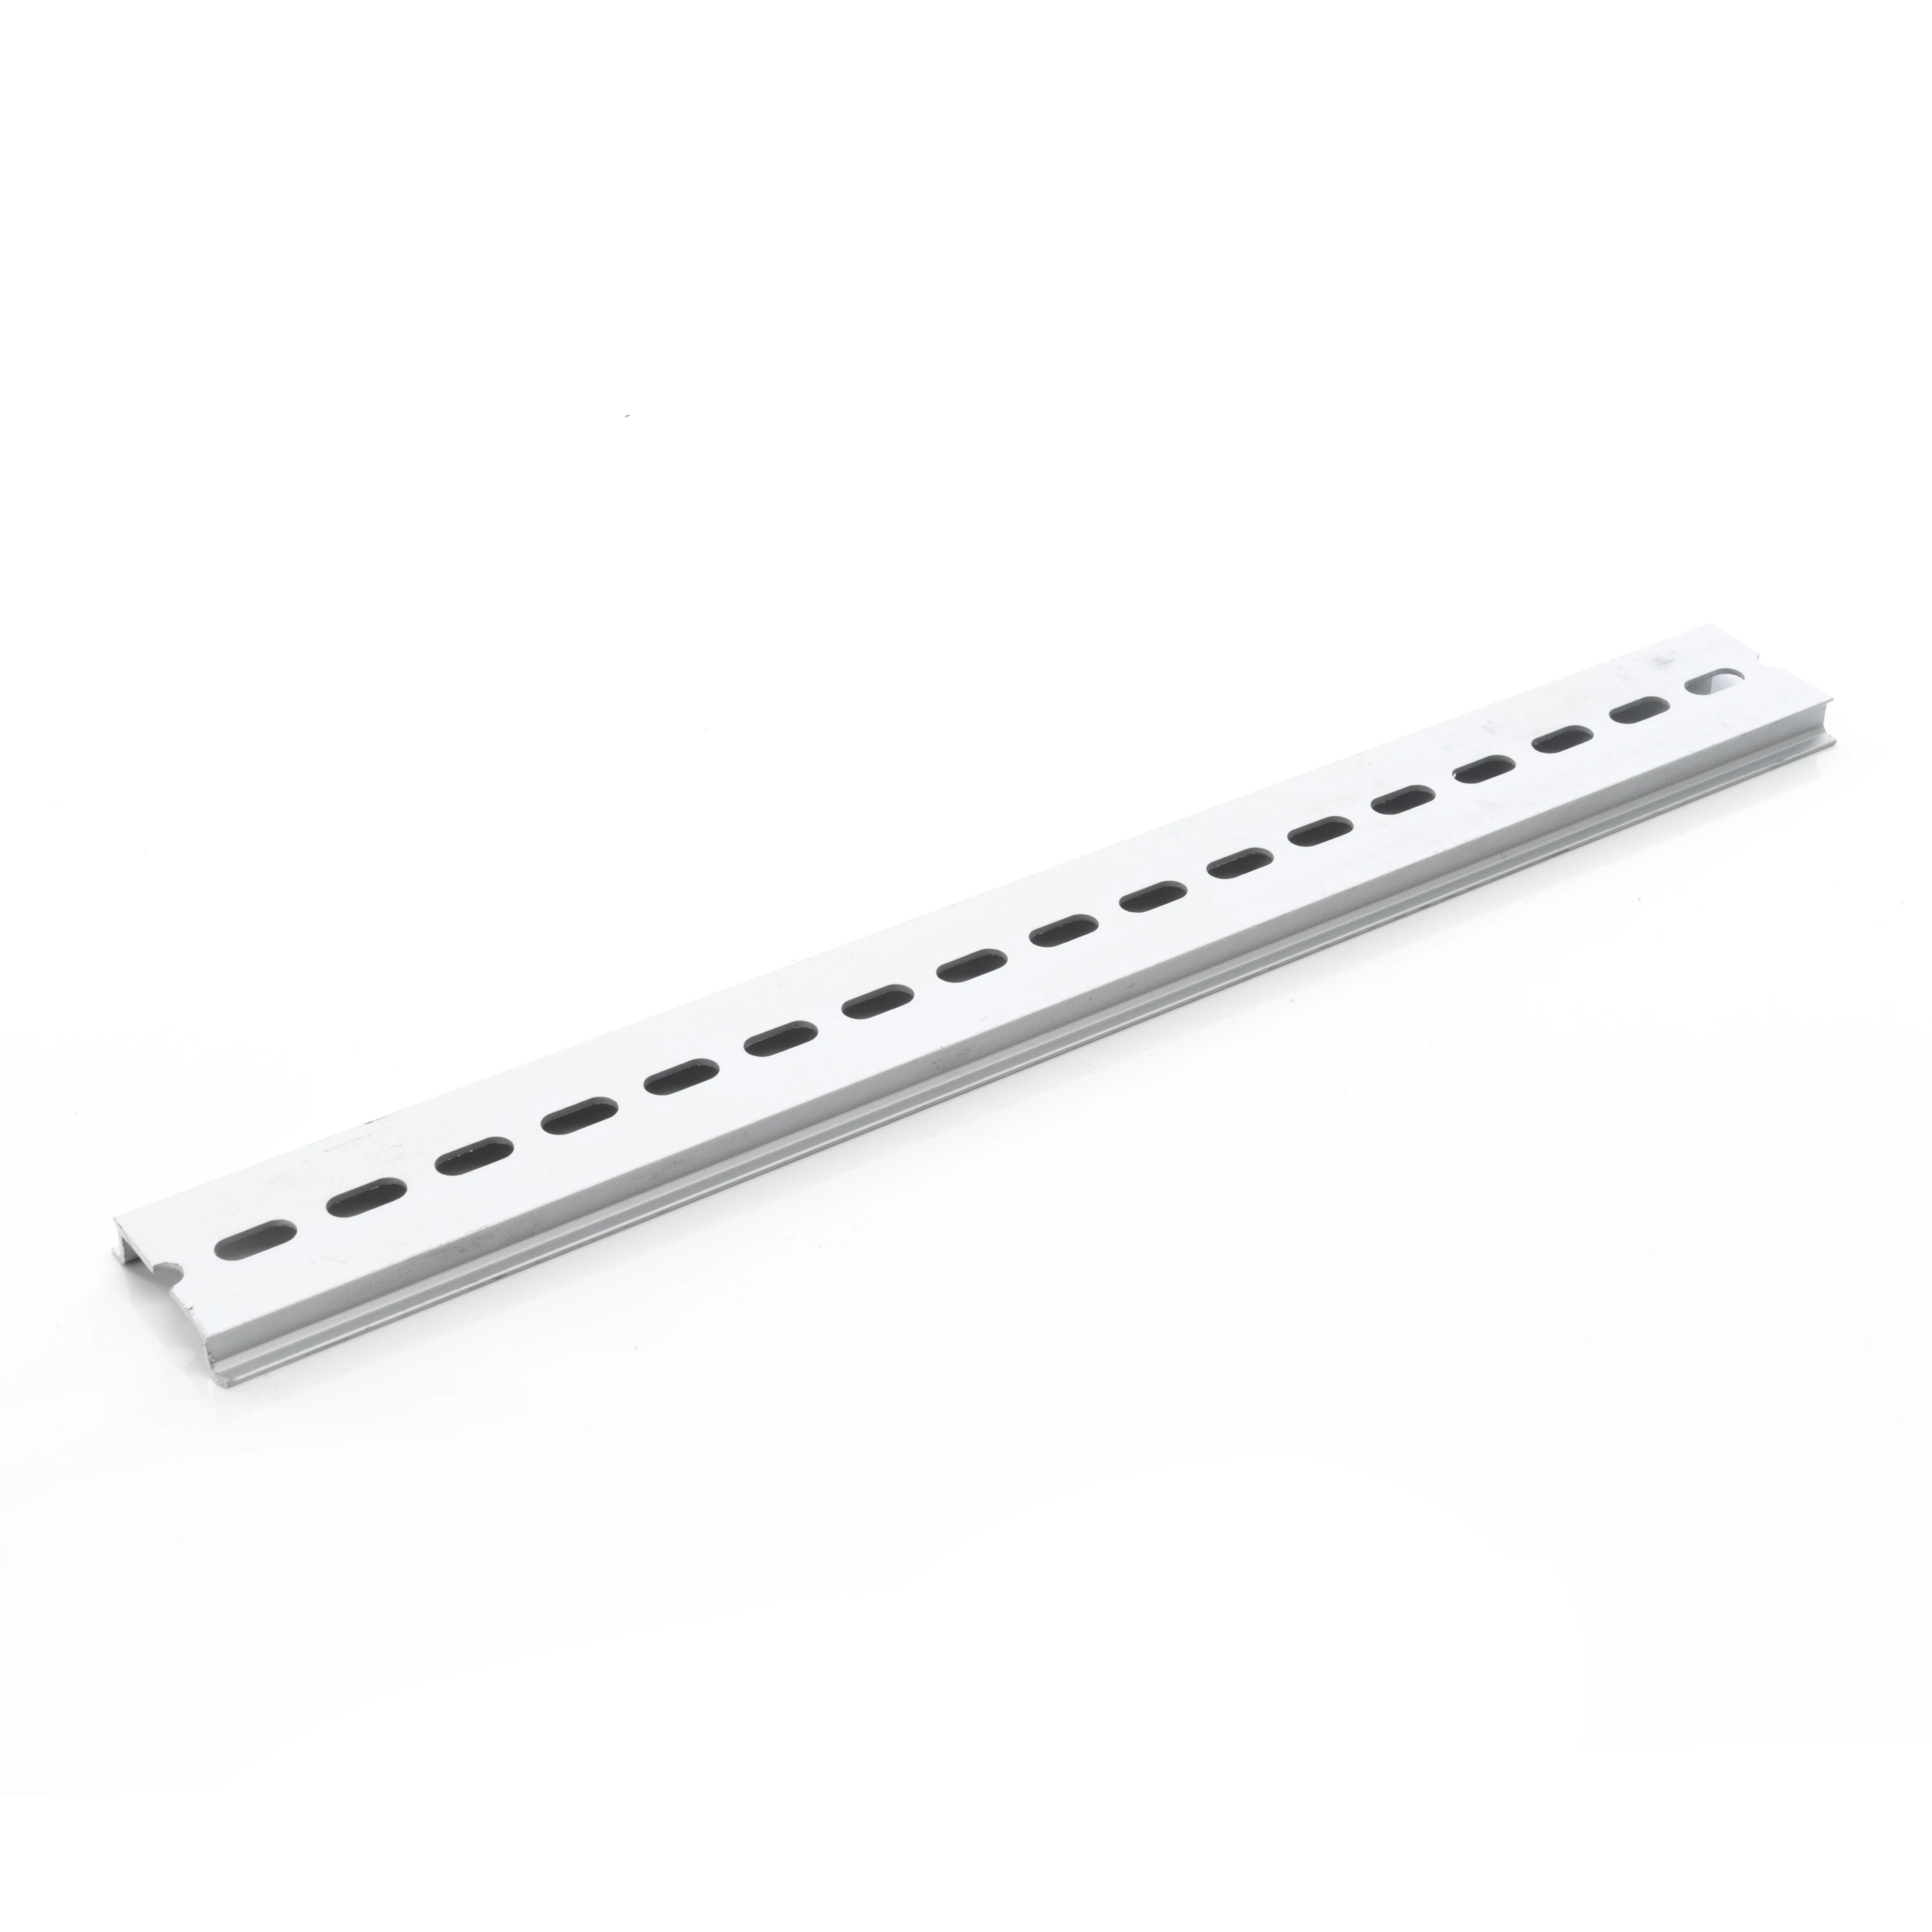 35x7.5 Aluminum Mounting Din Rail Slotted - Buy Alluminum Mounting Din ...